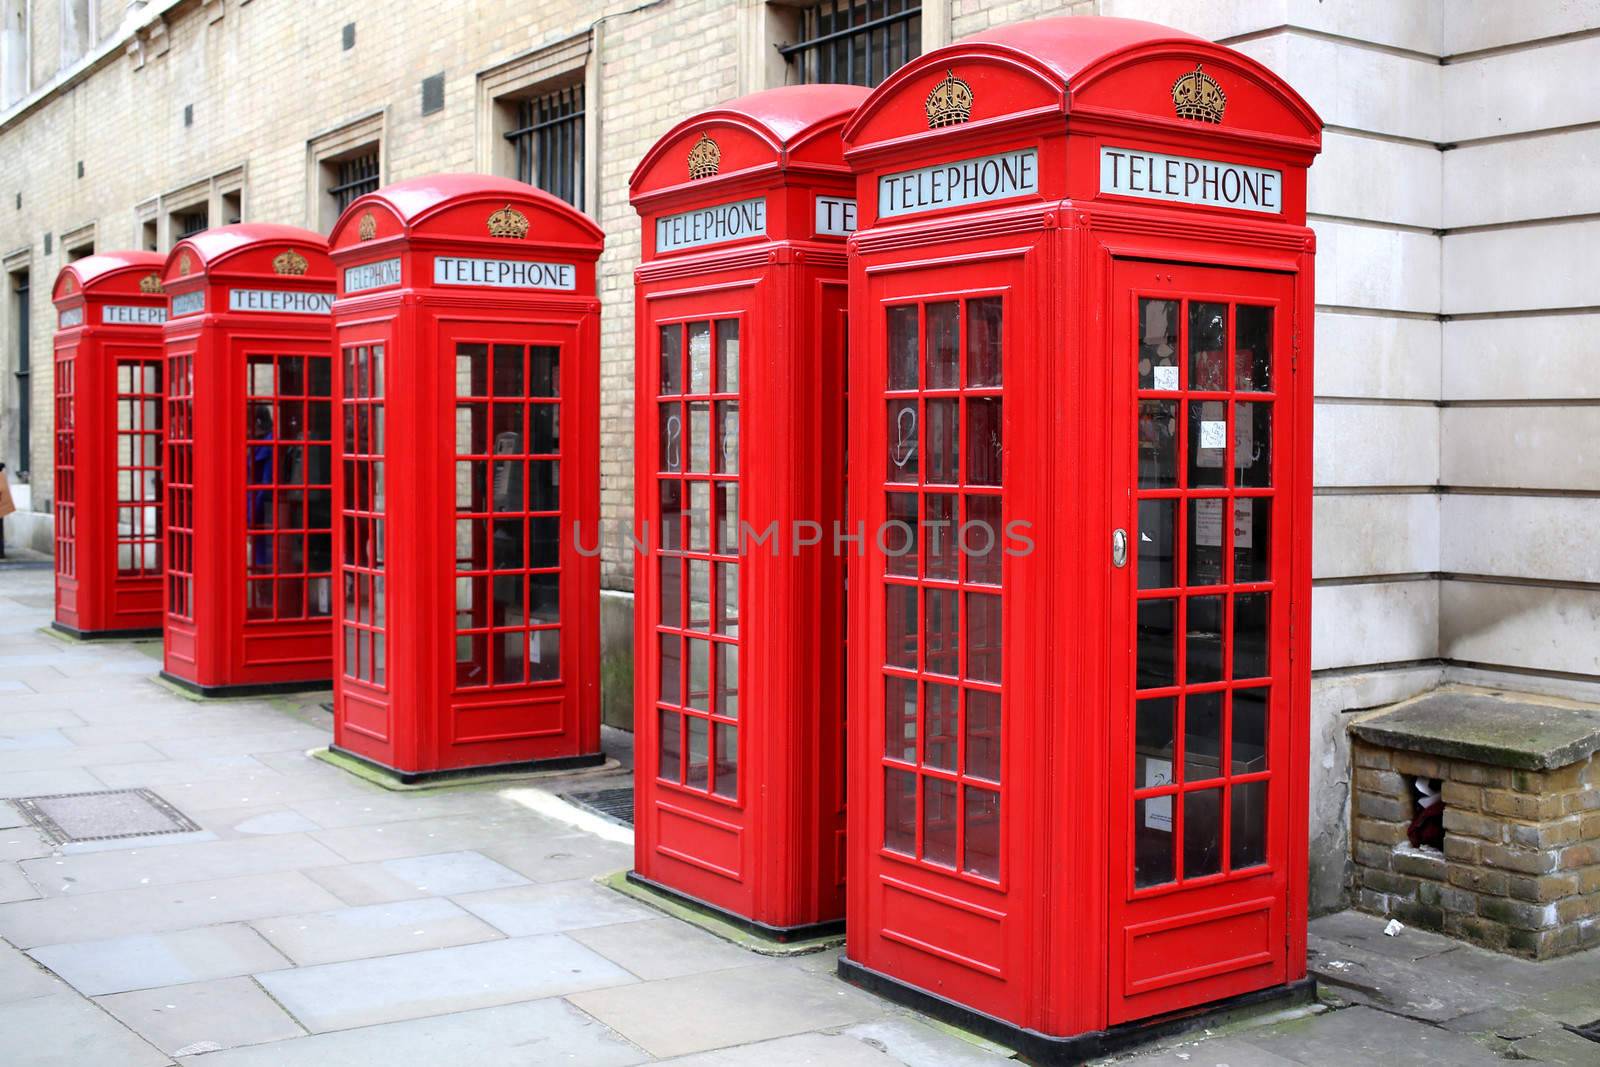 Red London Telephone Boxes by Whiteboxmedia